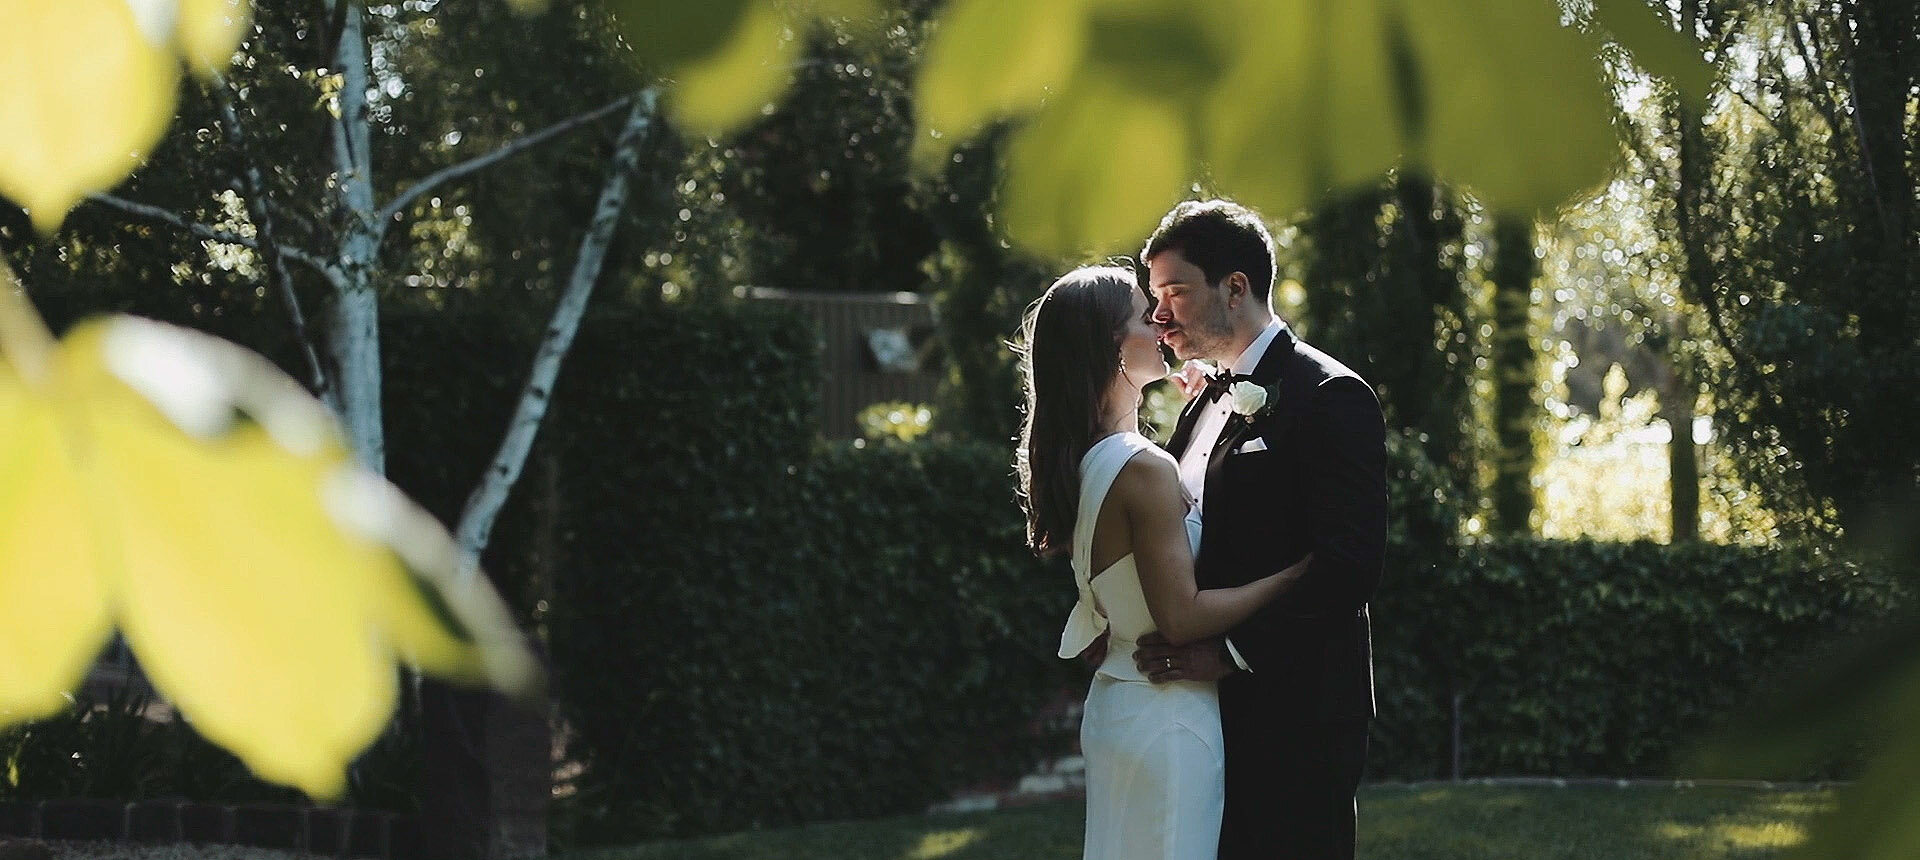 Annette-and-Dani-Films-Katie and Mat6-wedding-video.jpg